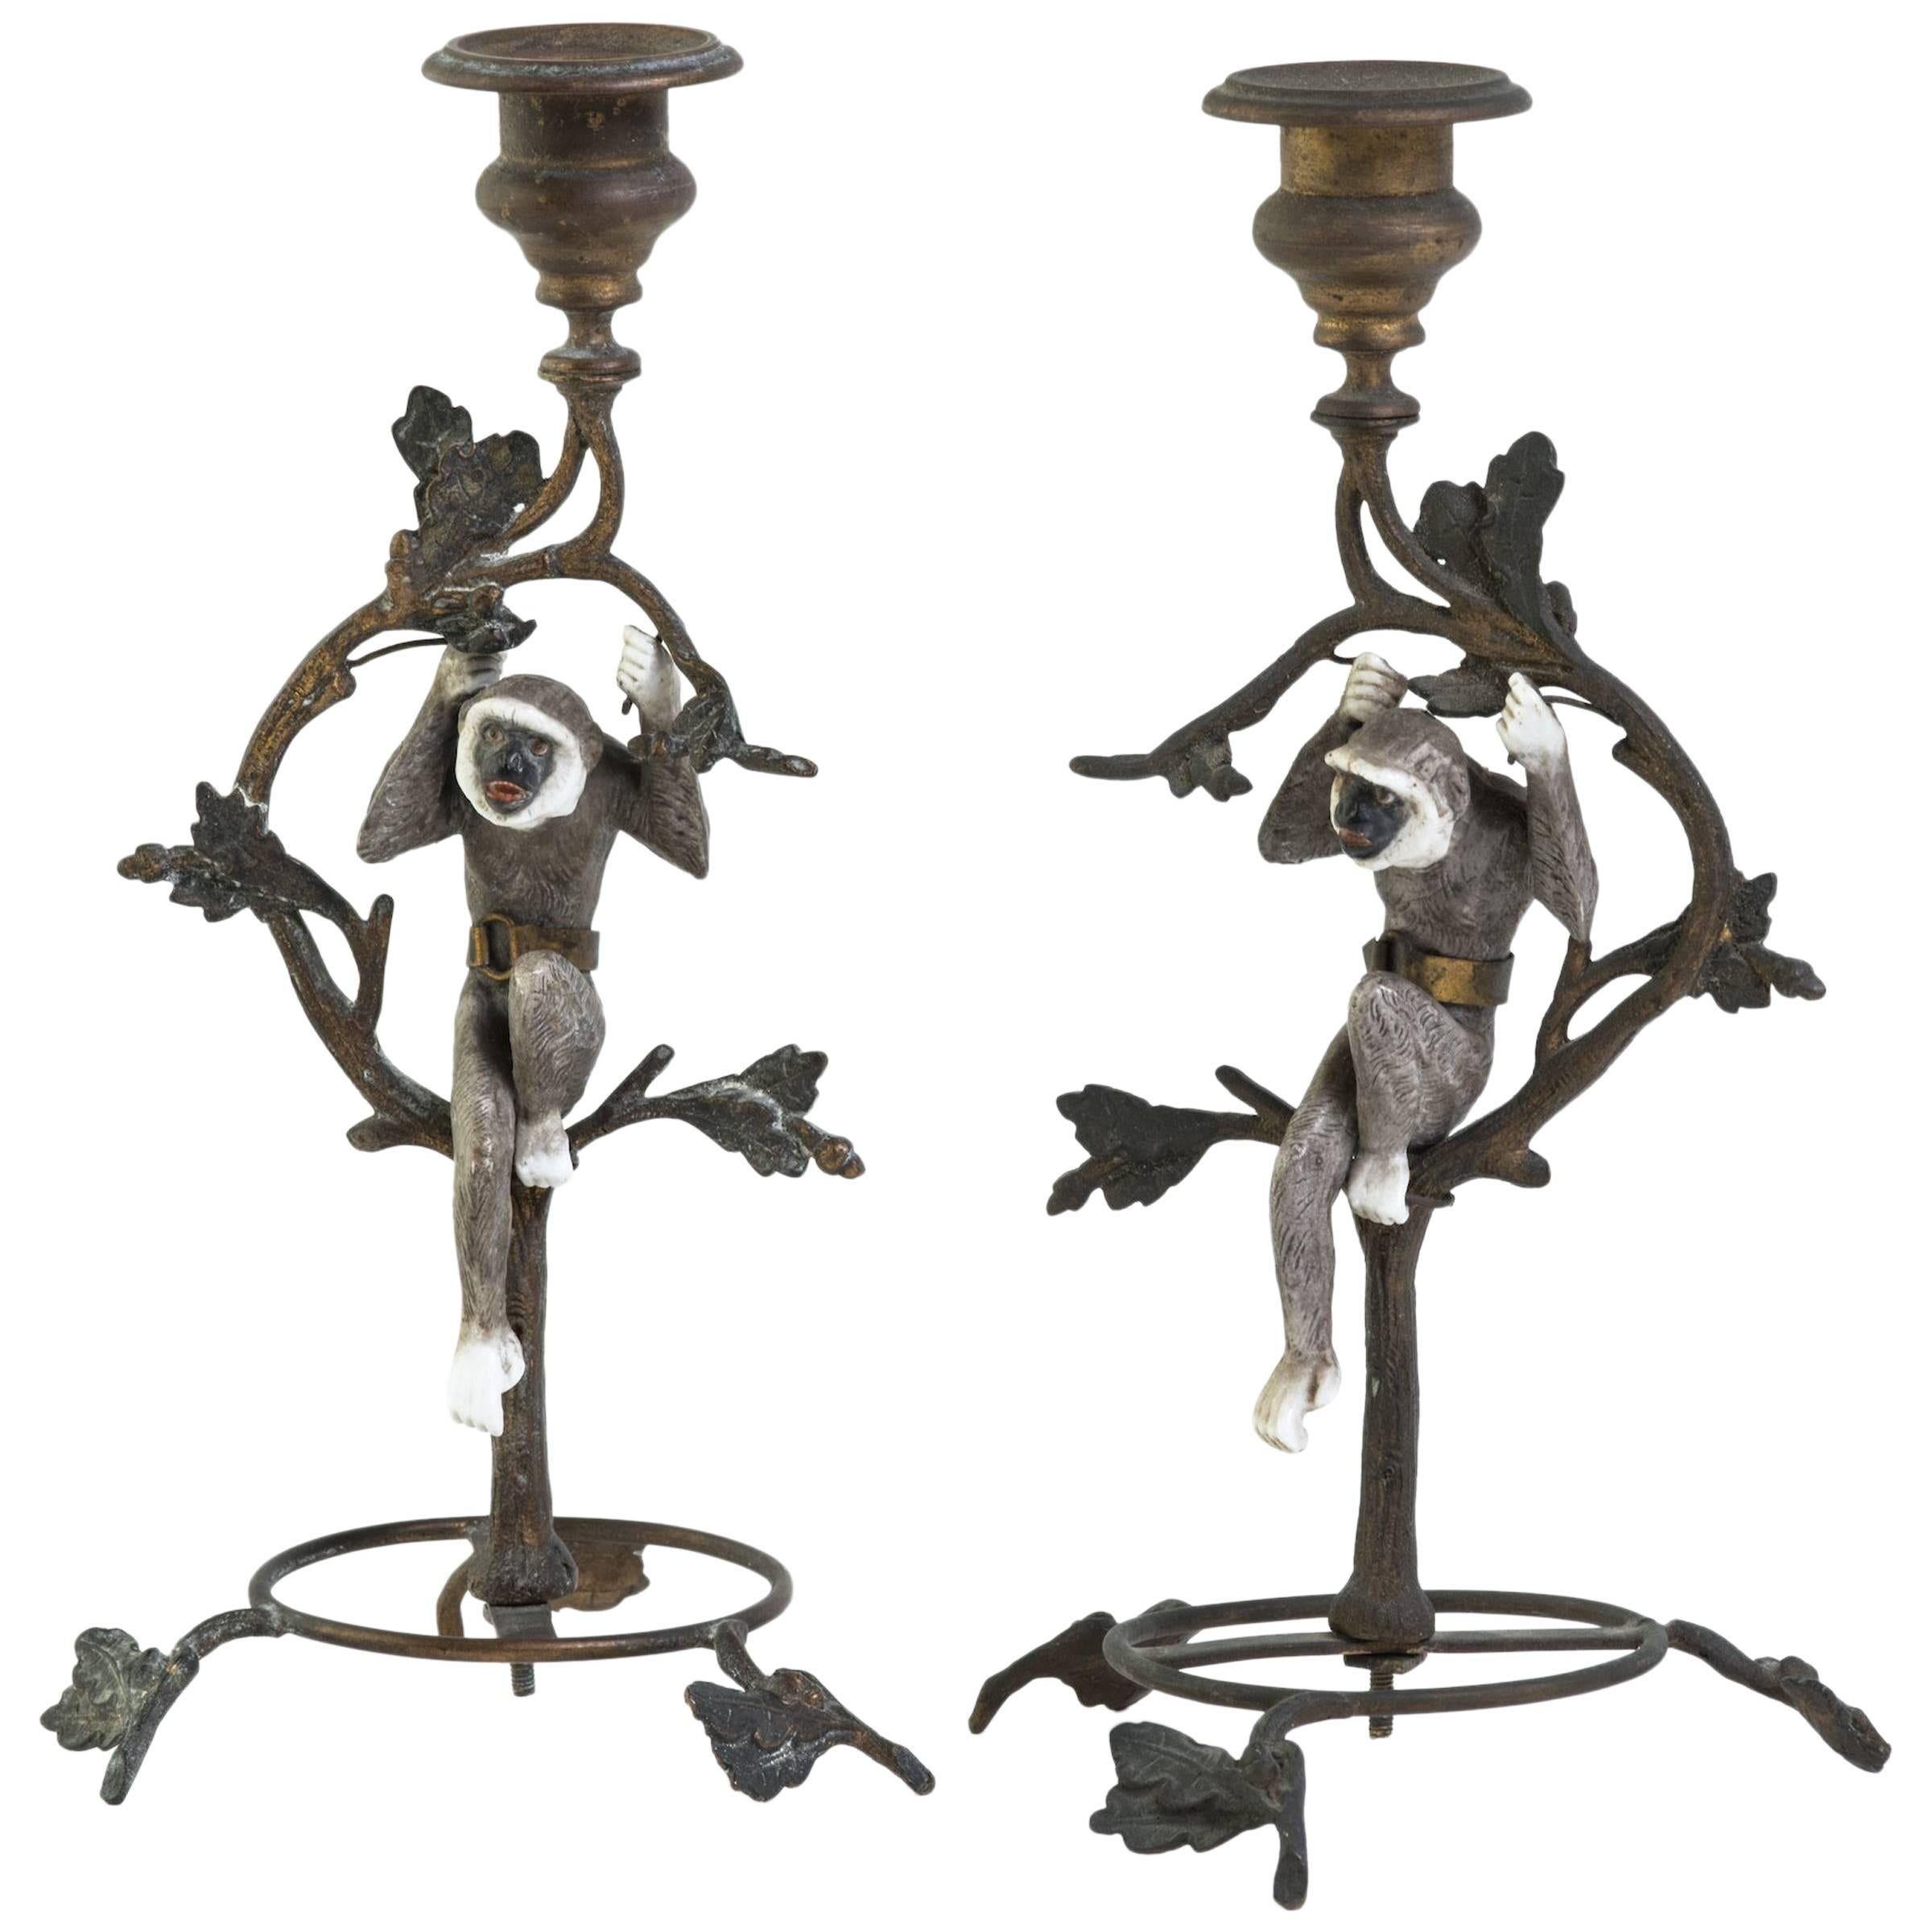 Pair of French Turn of the Century Brass and Porcelain Monkey Candlesticks